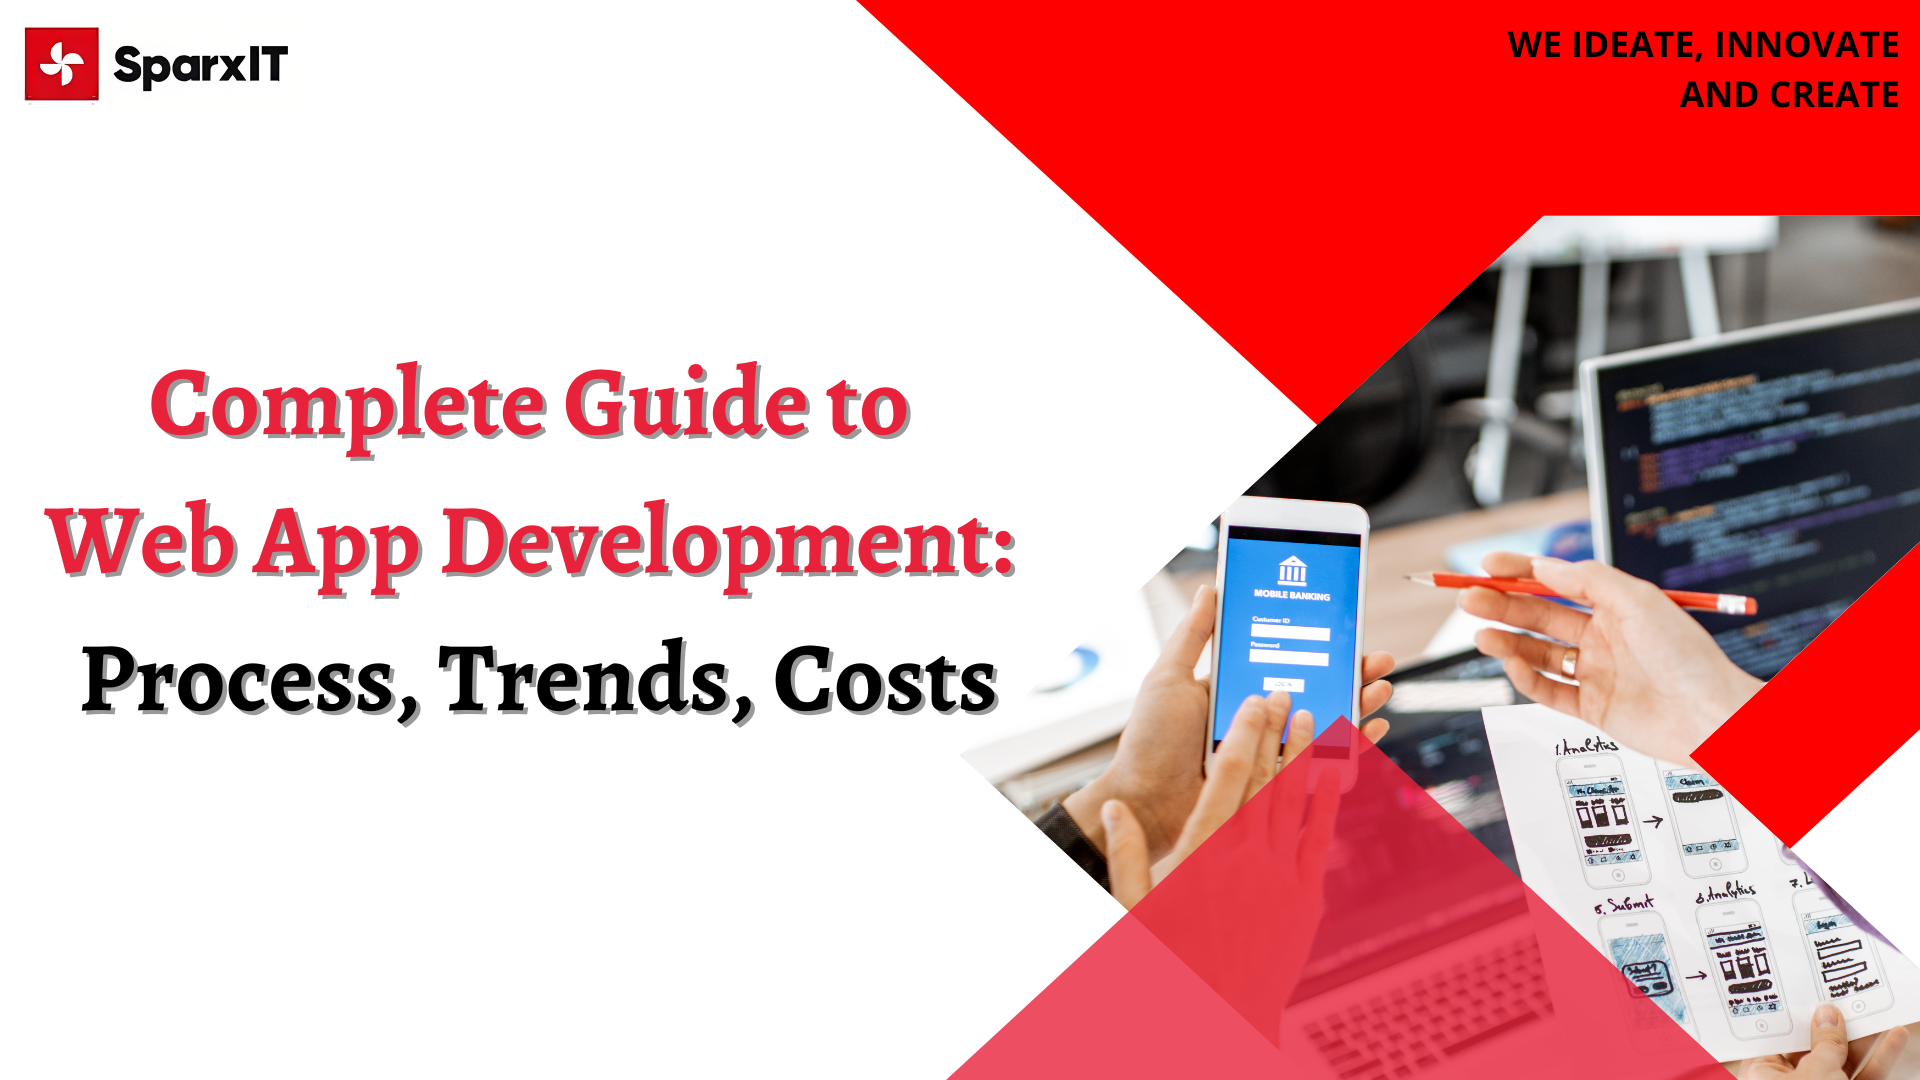 Complete Guide to Web App Development: Process, Trends, Costs